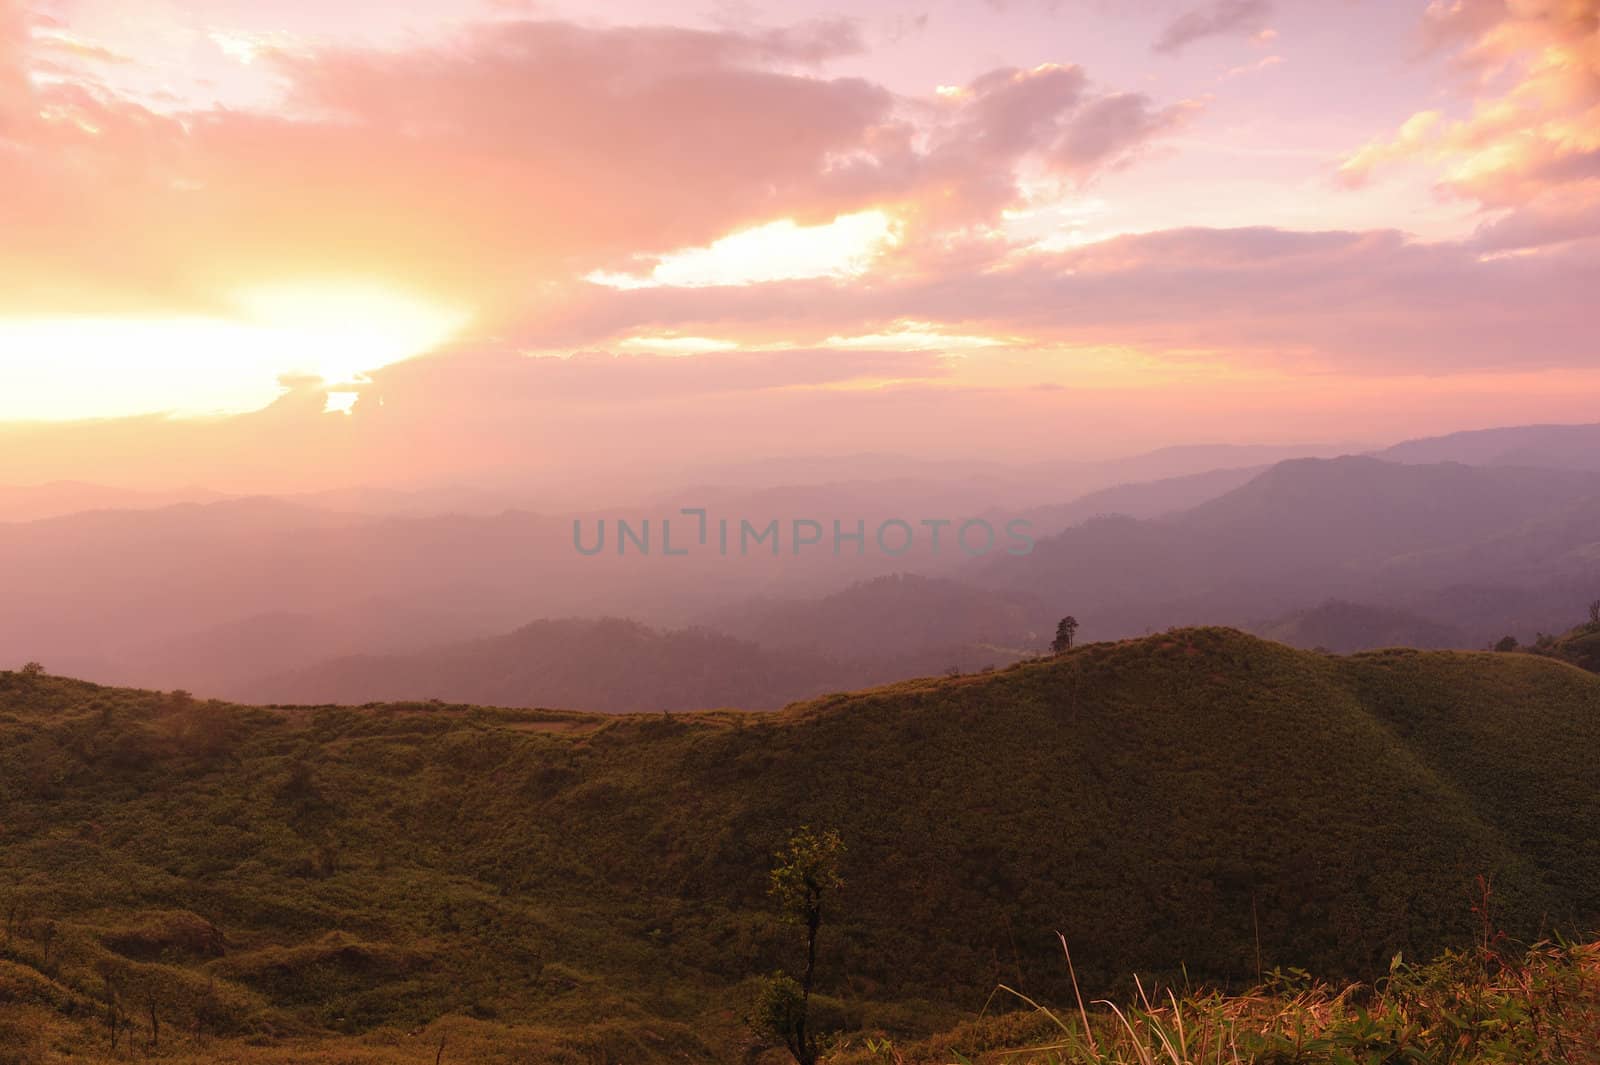 Nice sunset scene in mountains  by ngungfoto